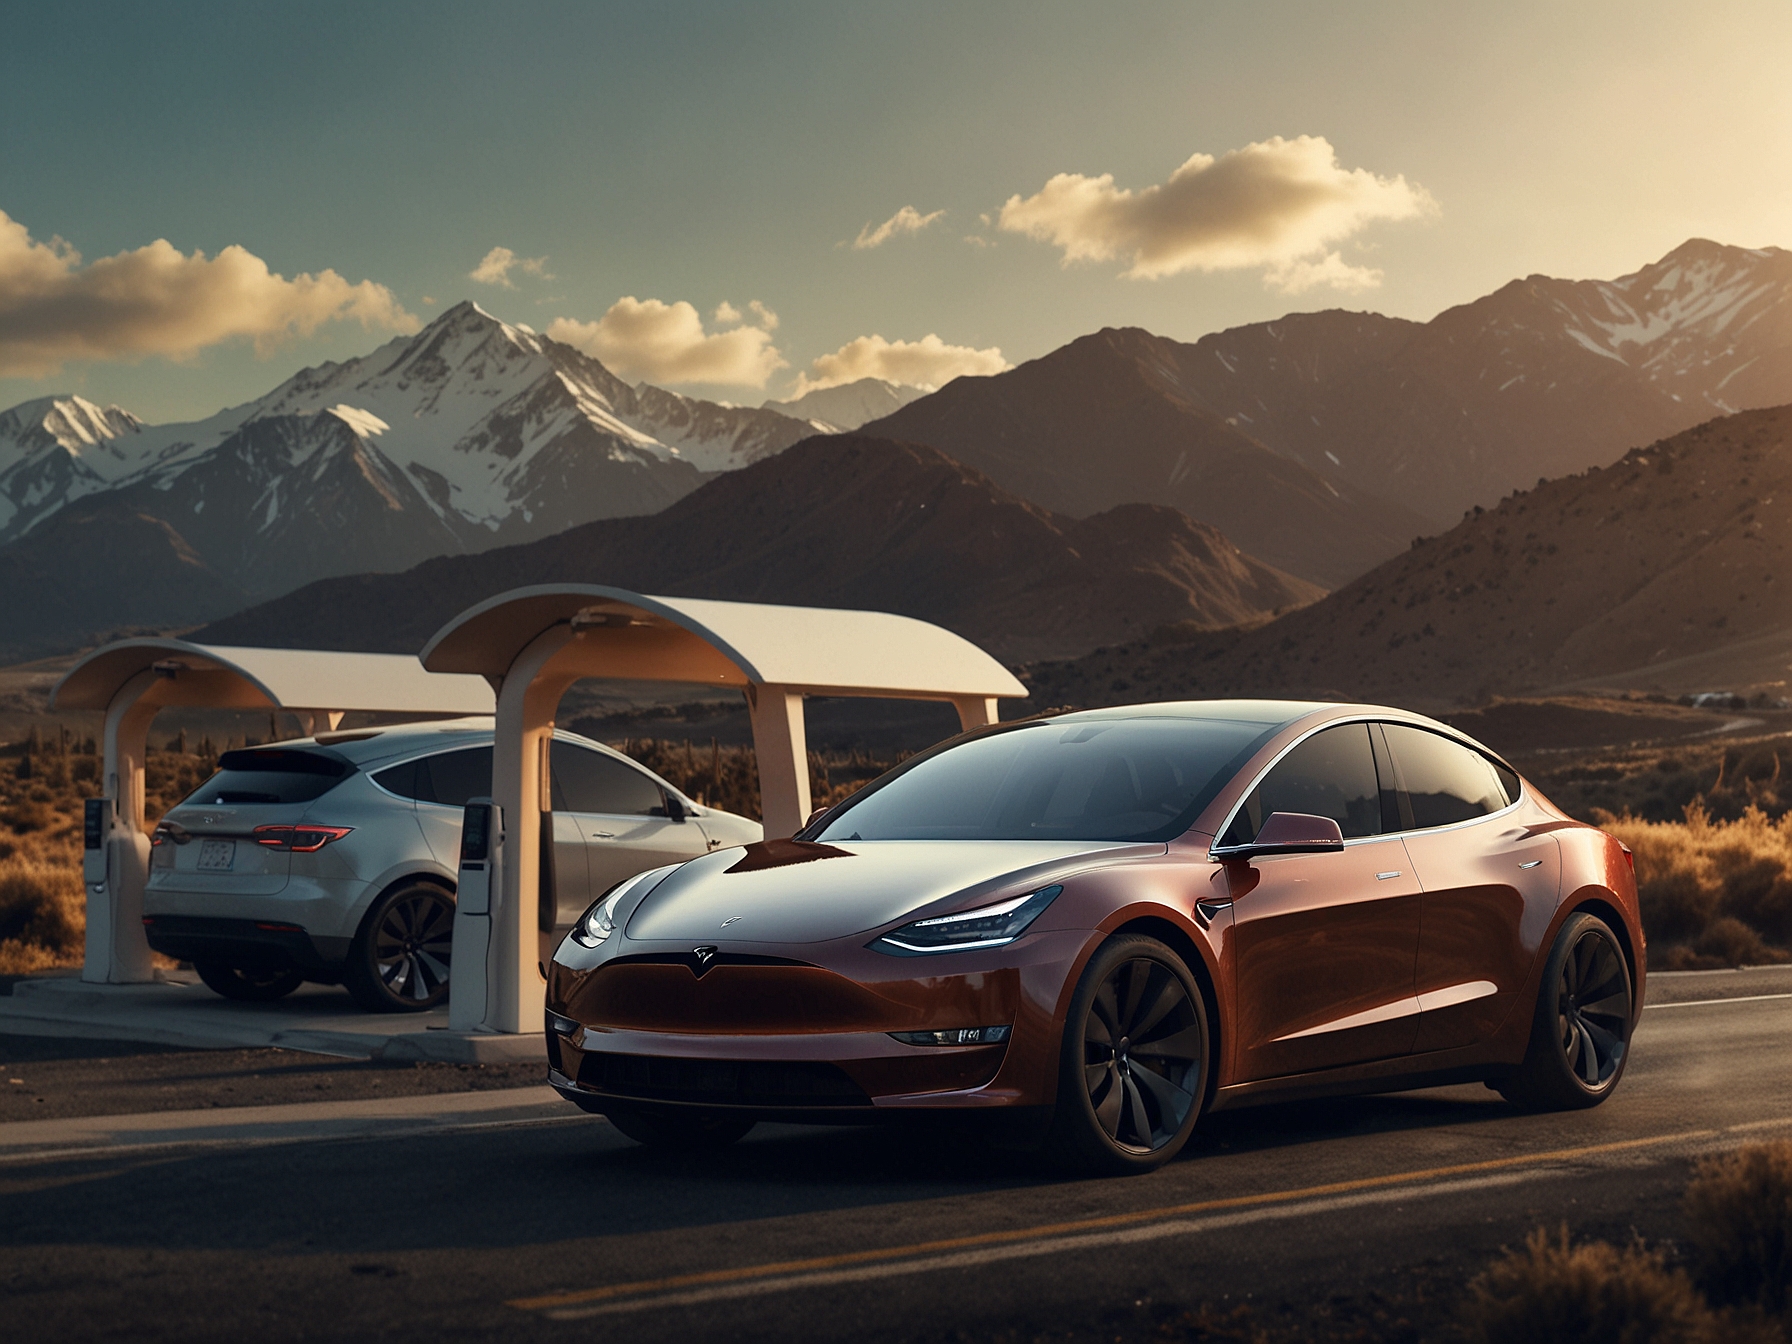 A family embarking on a road trip in a Tesla Model Y, with an infographic showing the cost savings of charging the EV compared to refueling a gasoline vehicle.